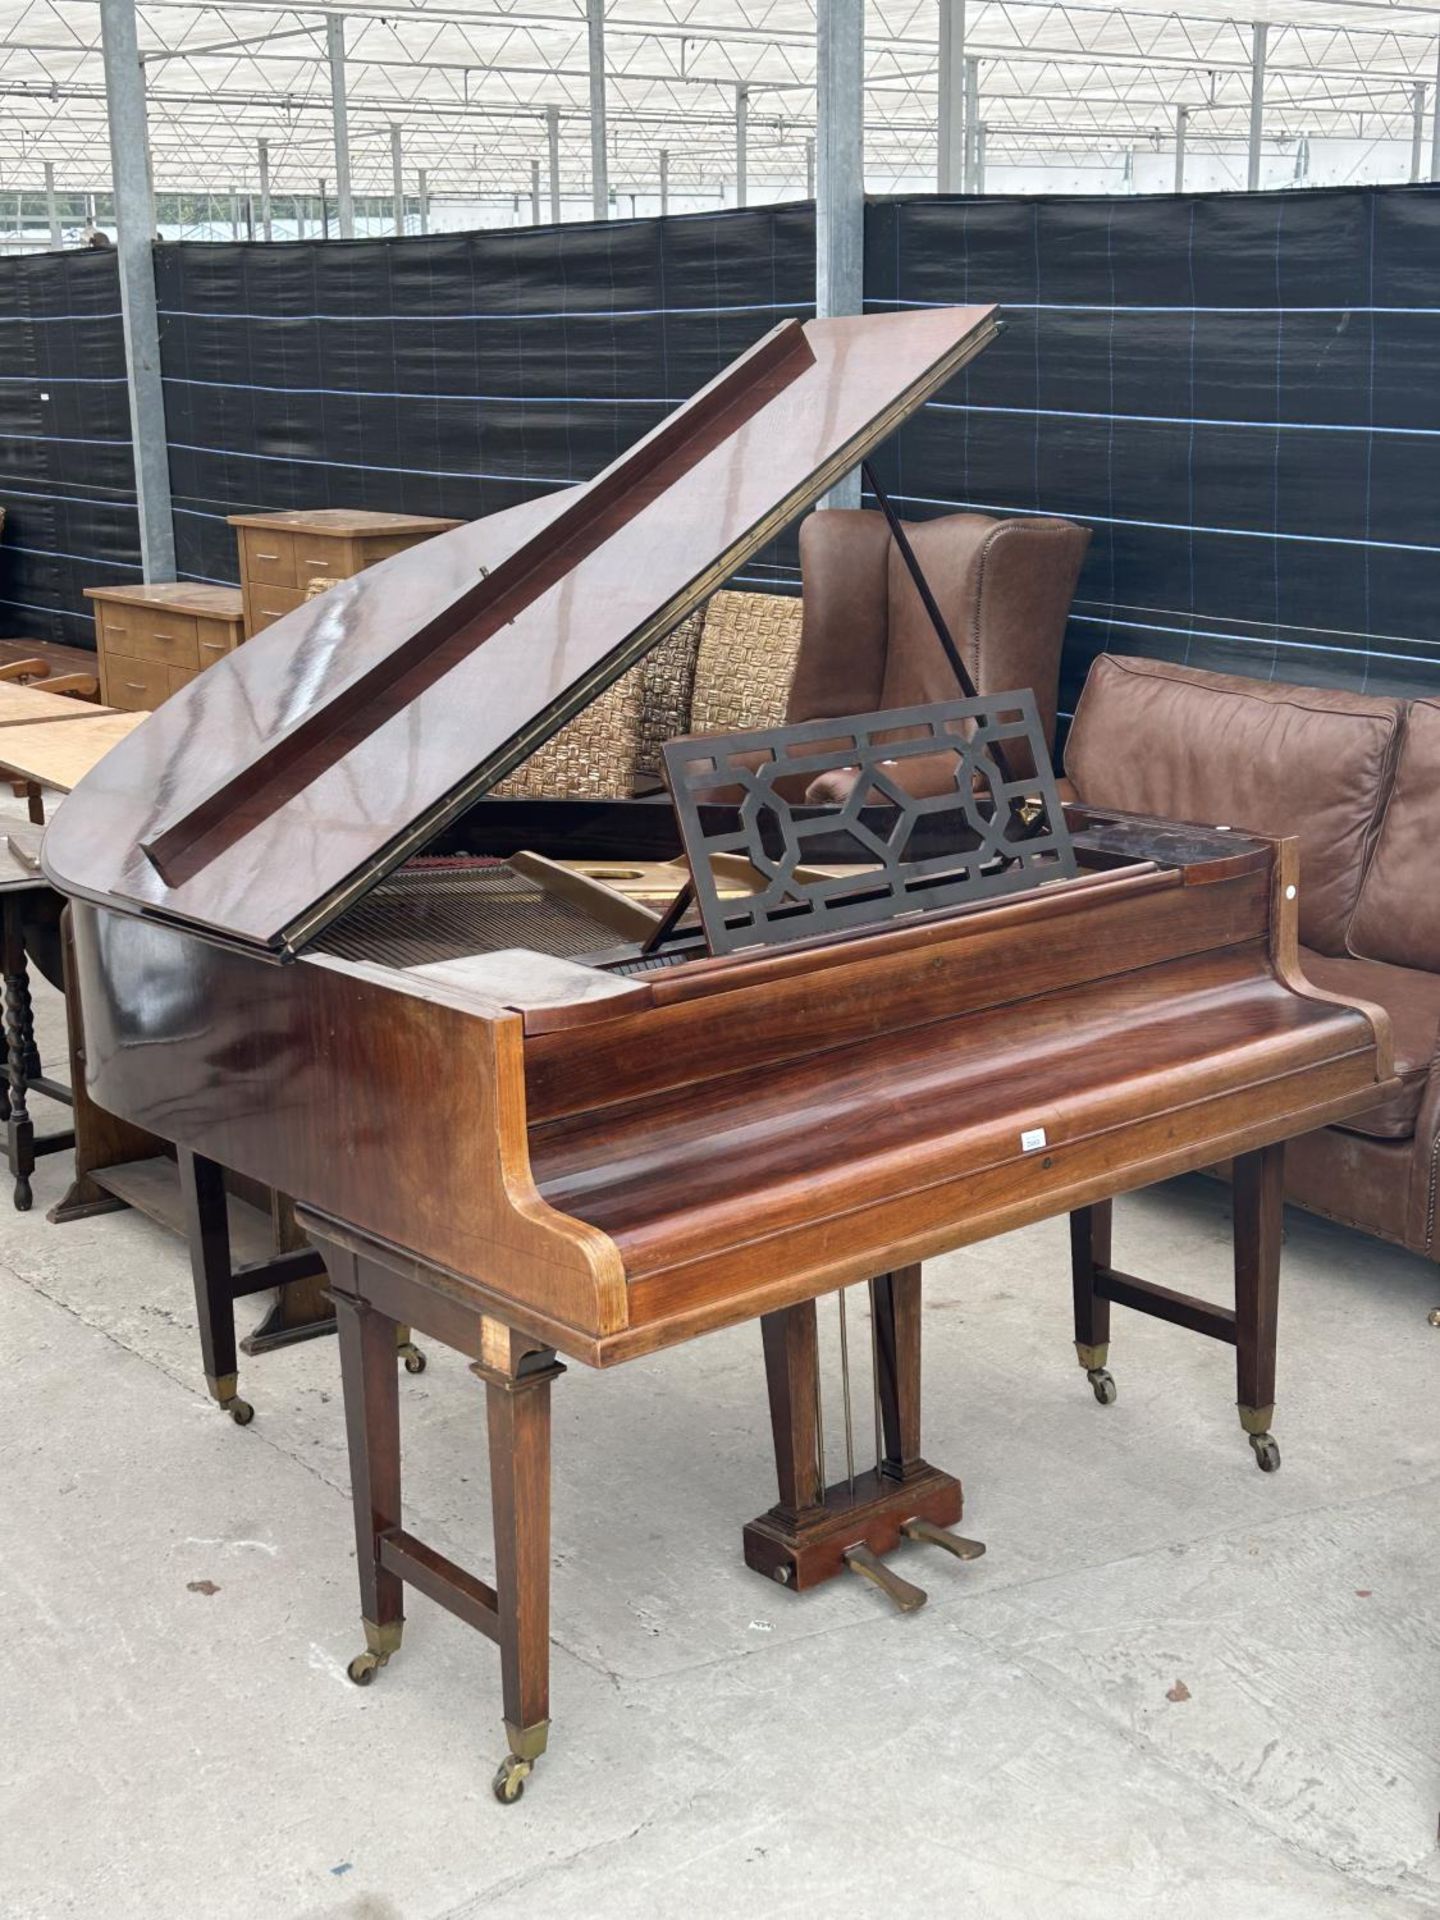 A JOHN BROADWOOD & SONS BOUDOIR GRAND PIANO (NO.52856) ON SIX TAPERING LEGS, WITH BRASS FITTINGS AND